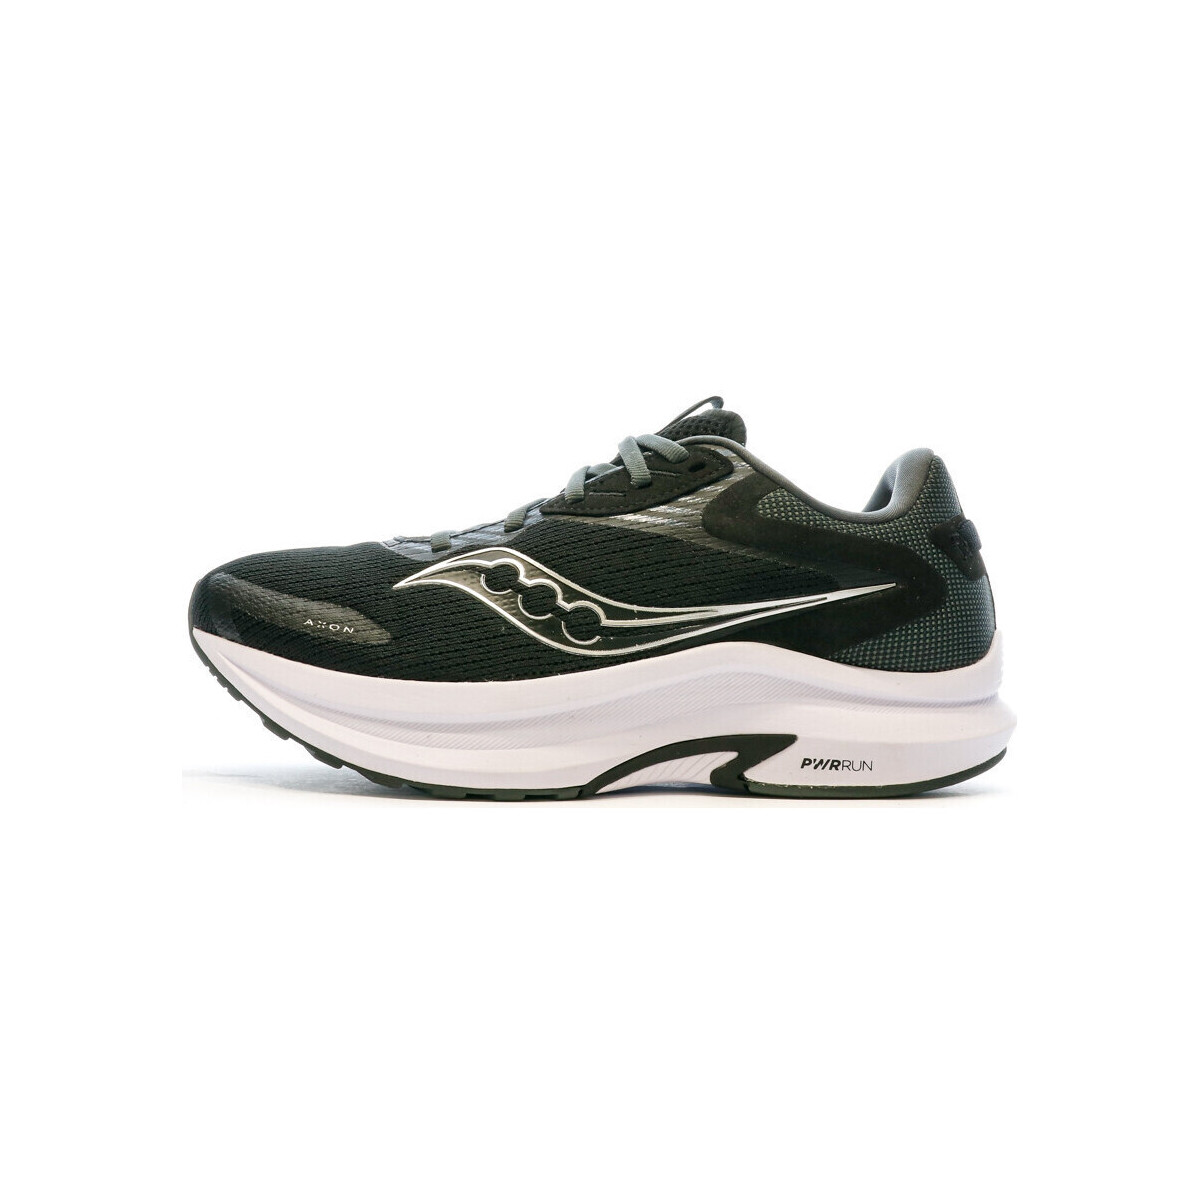 Chaussures Homme Running / trail Saucony S20732-05 Noir